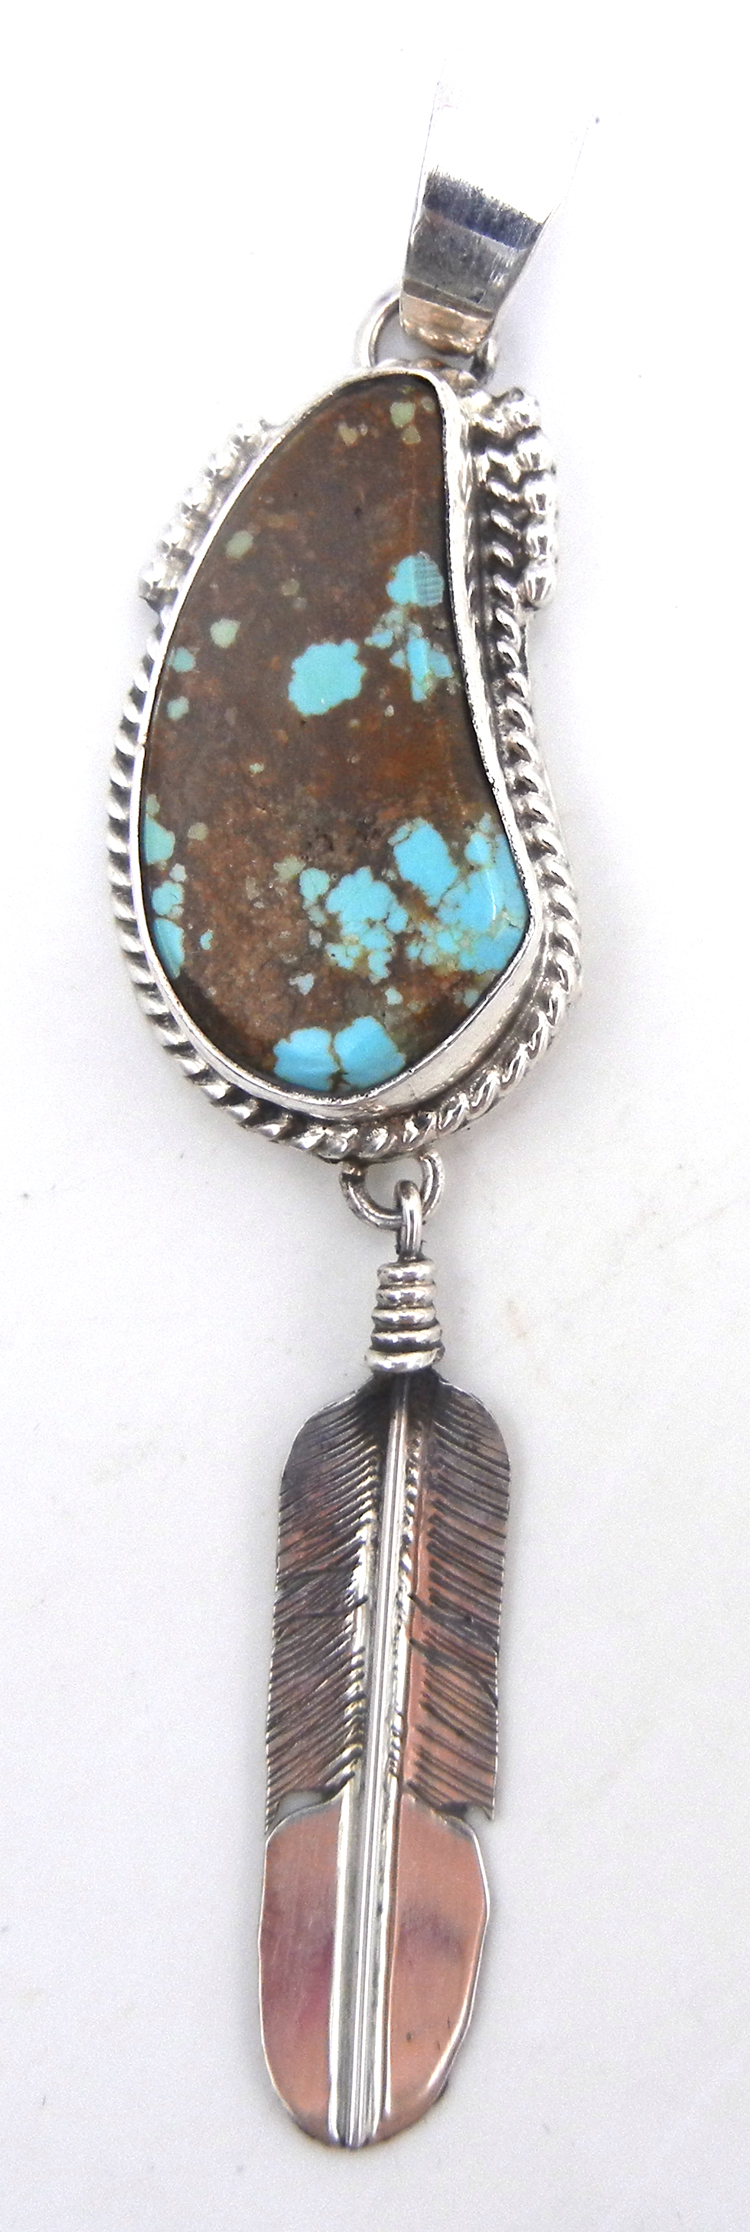 Navajo turquoise and sterling silver feather dangle pendant by Bennie Ration